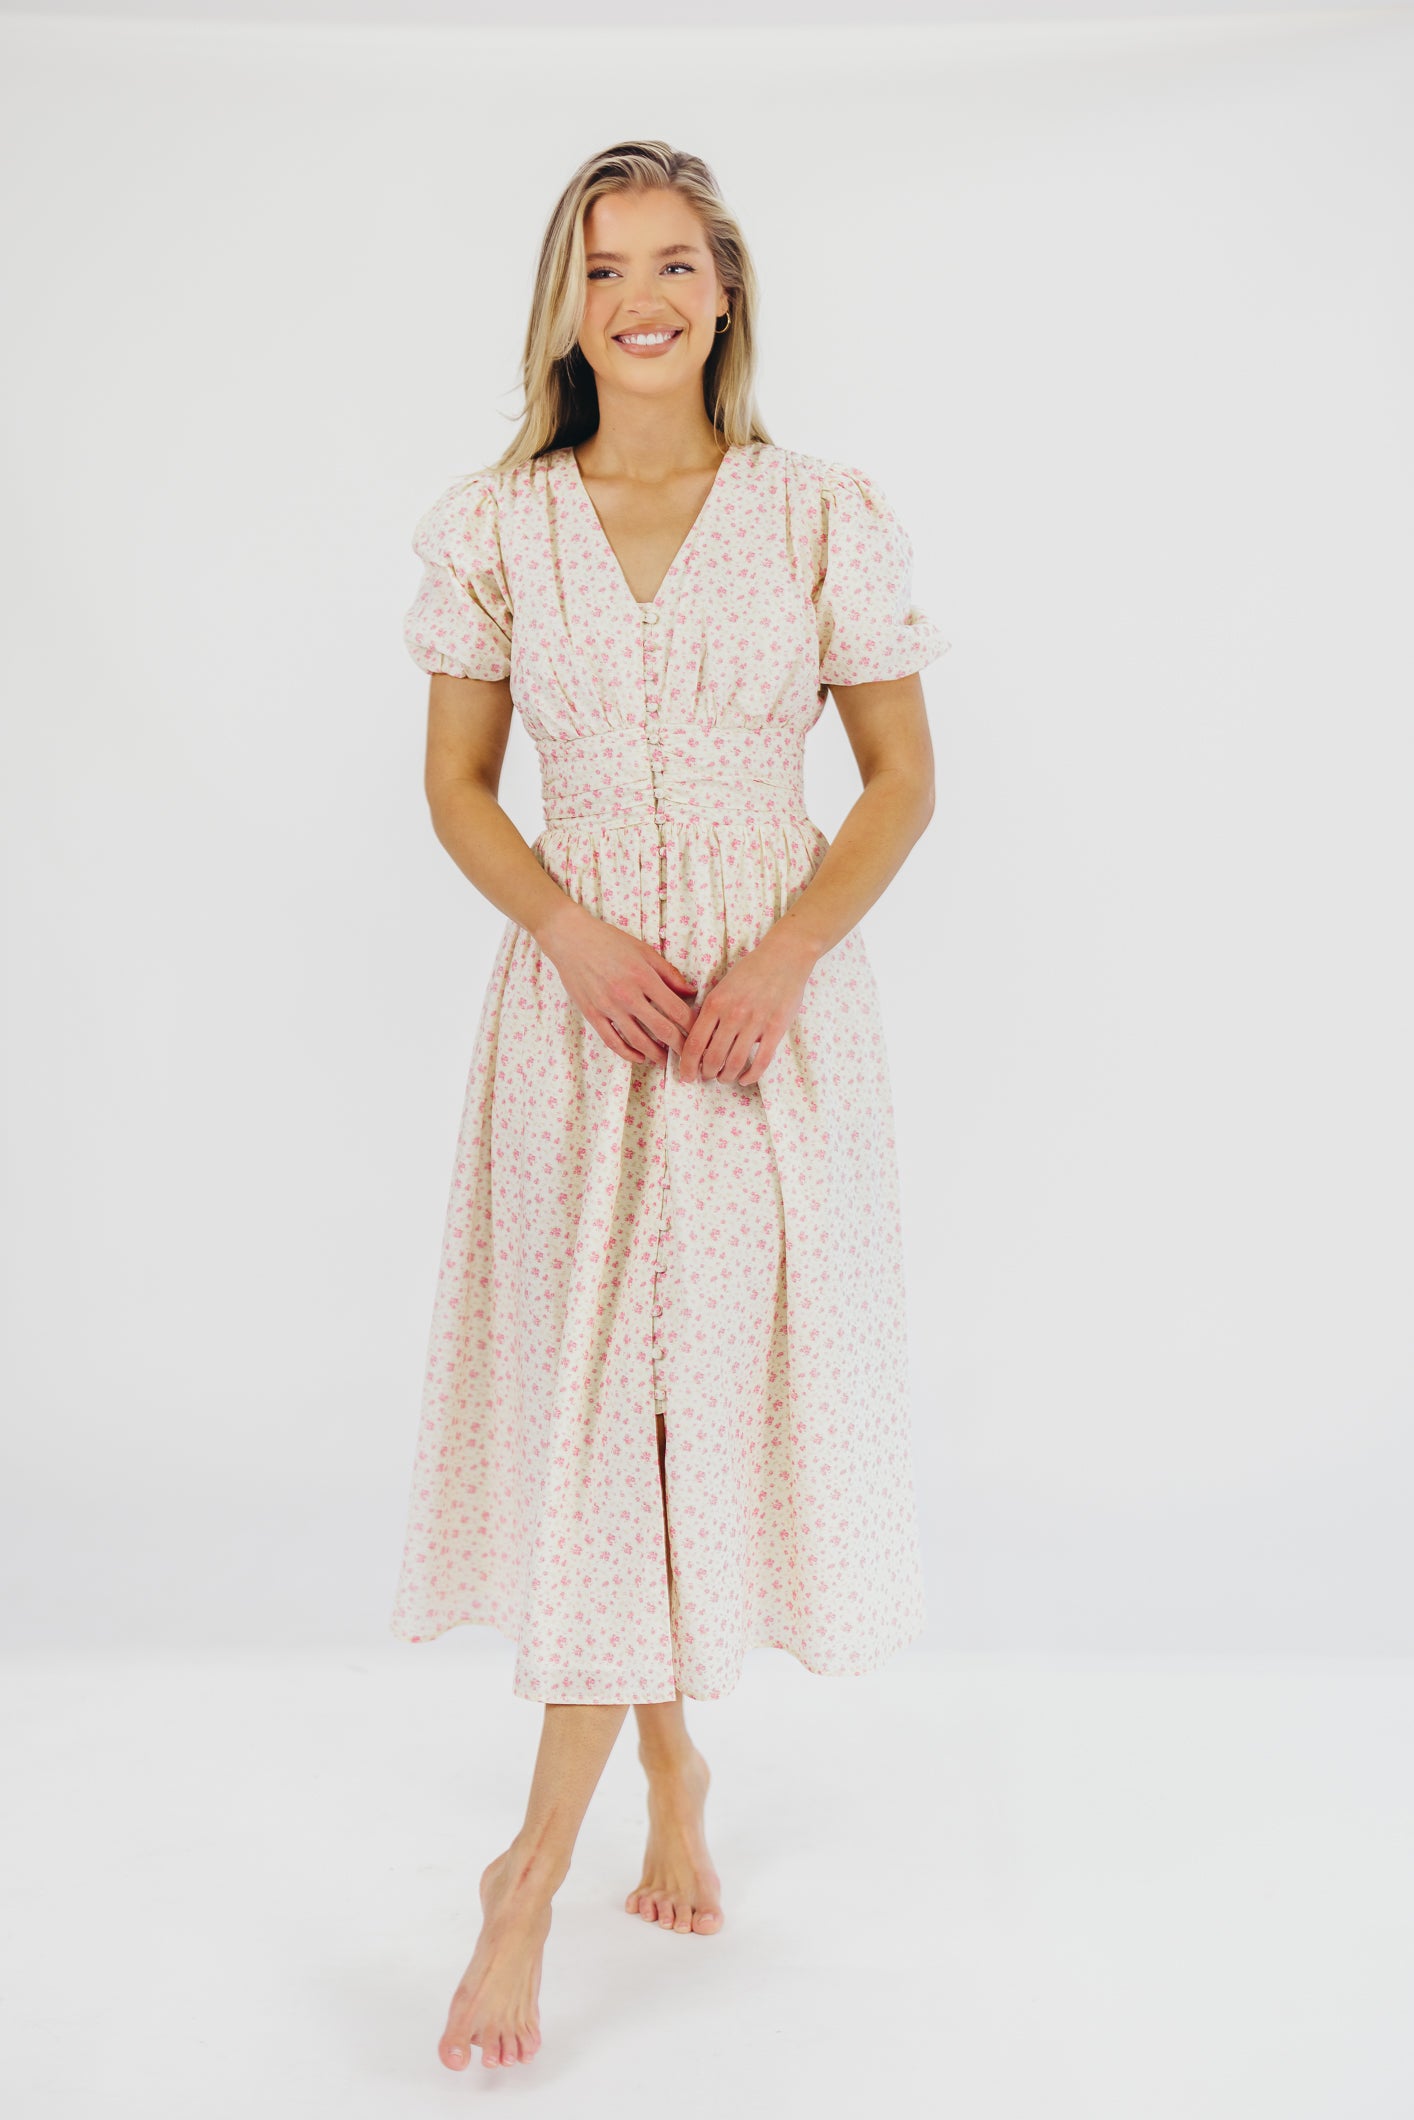 Billie Pleated Maxi Dress in White Pink Floral - Bump Friendly & Inclusive Sizing (S-3XL)